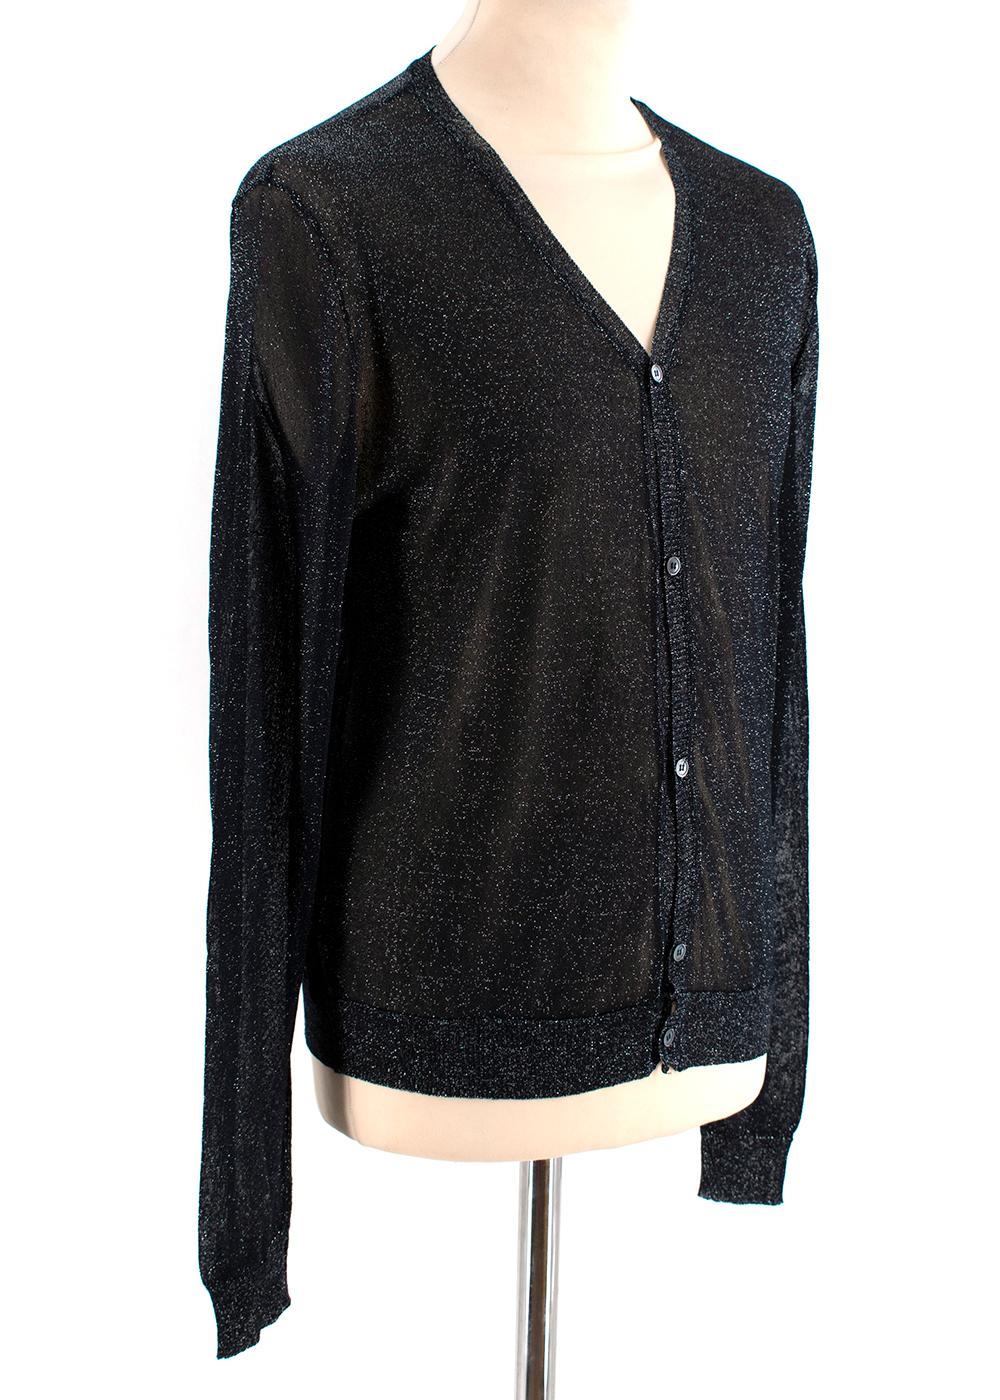 Men's Fendi Glittery Sheer Cardigan 48 EU

- Small metallic buttons
- Silvery sparkles blended into the fabric 
- Sheer finish
- V-neckline
- Ribbed hemlines & Cuffs 
- Raw edges
- 48 = Medium

Fabric Composition:
80% Rayon
20% Polyester

Made in